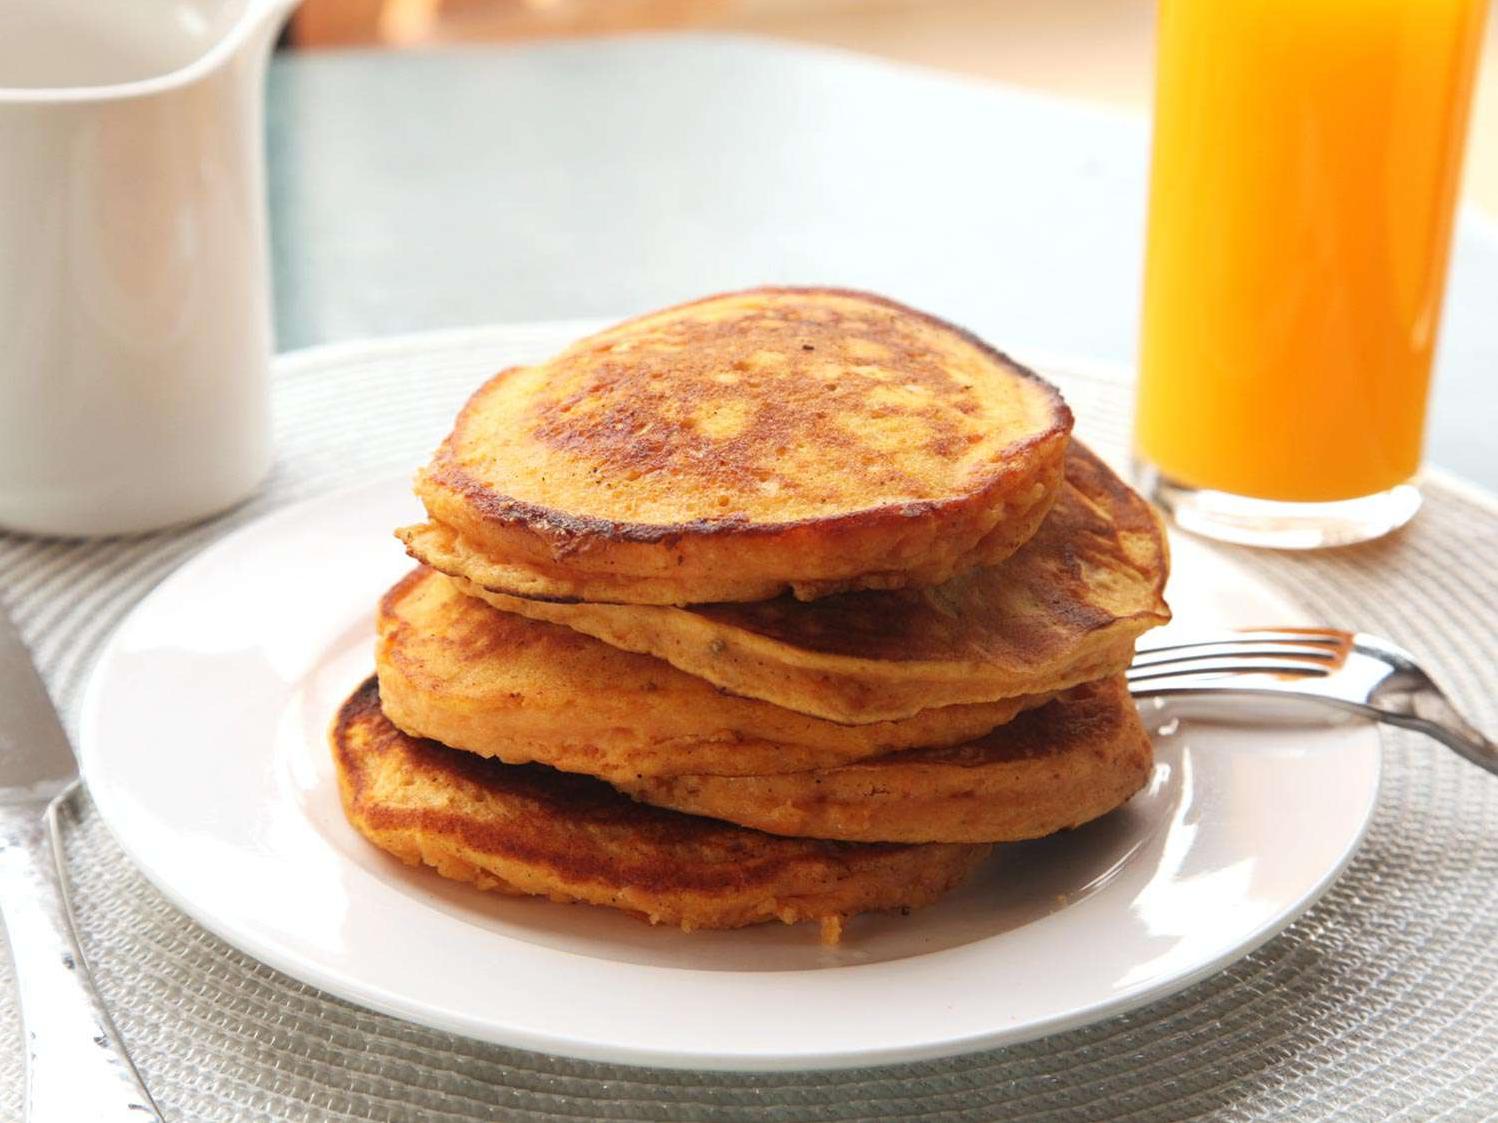  Southern hospitality on a plate - these pancakes are sure to make your taste buds dance with joy!